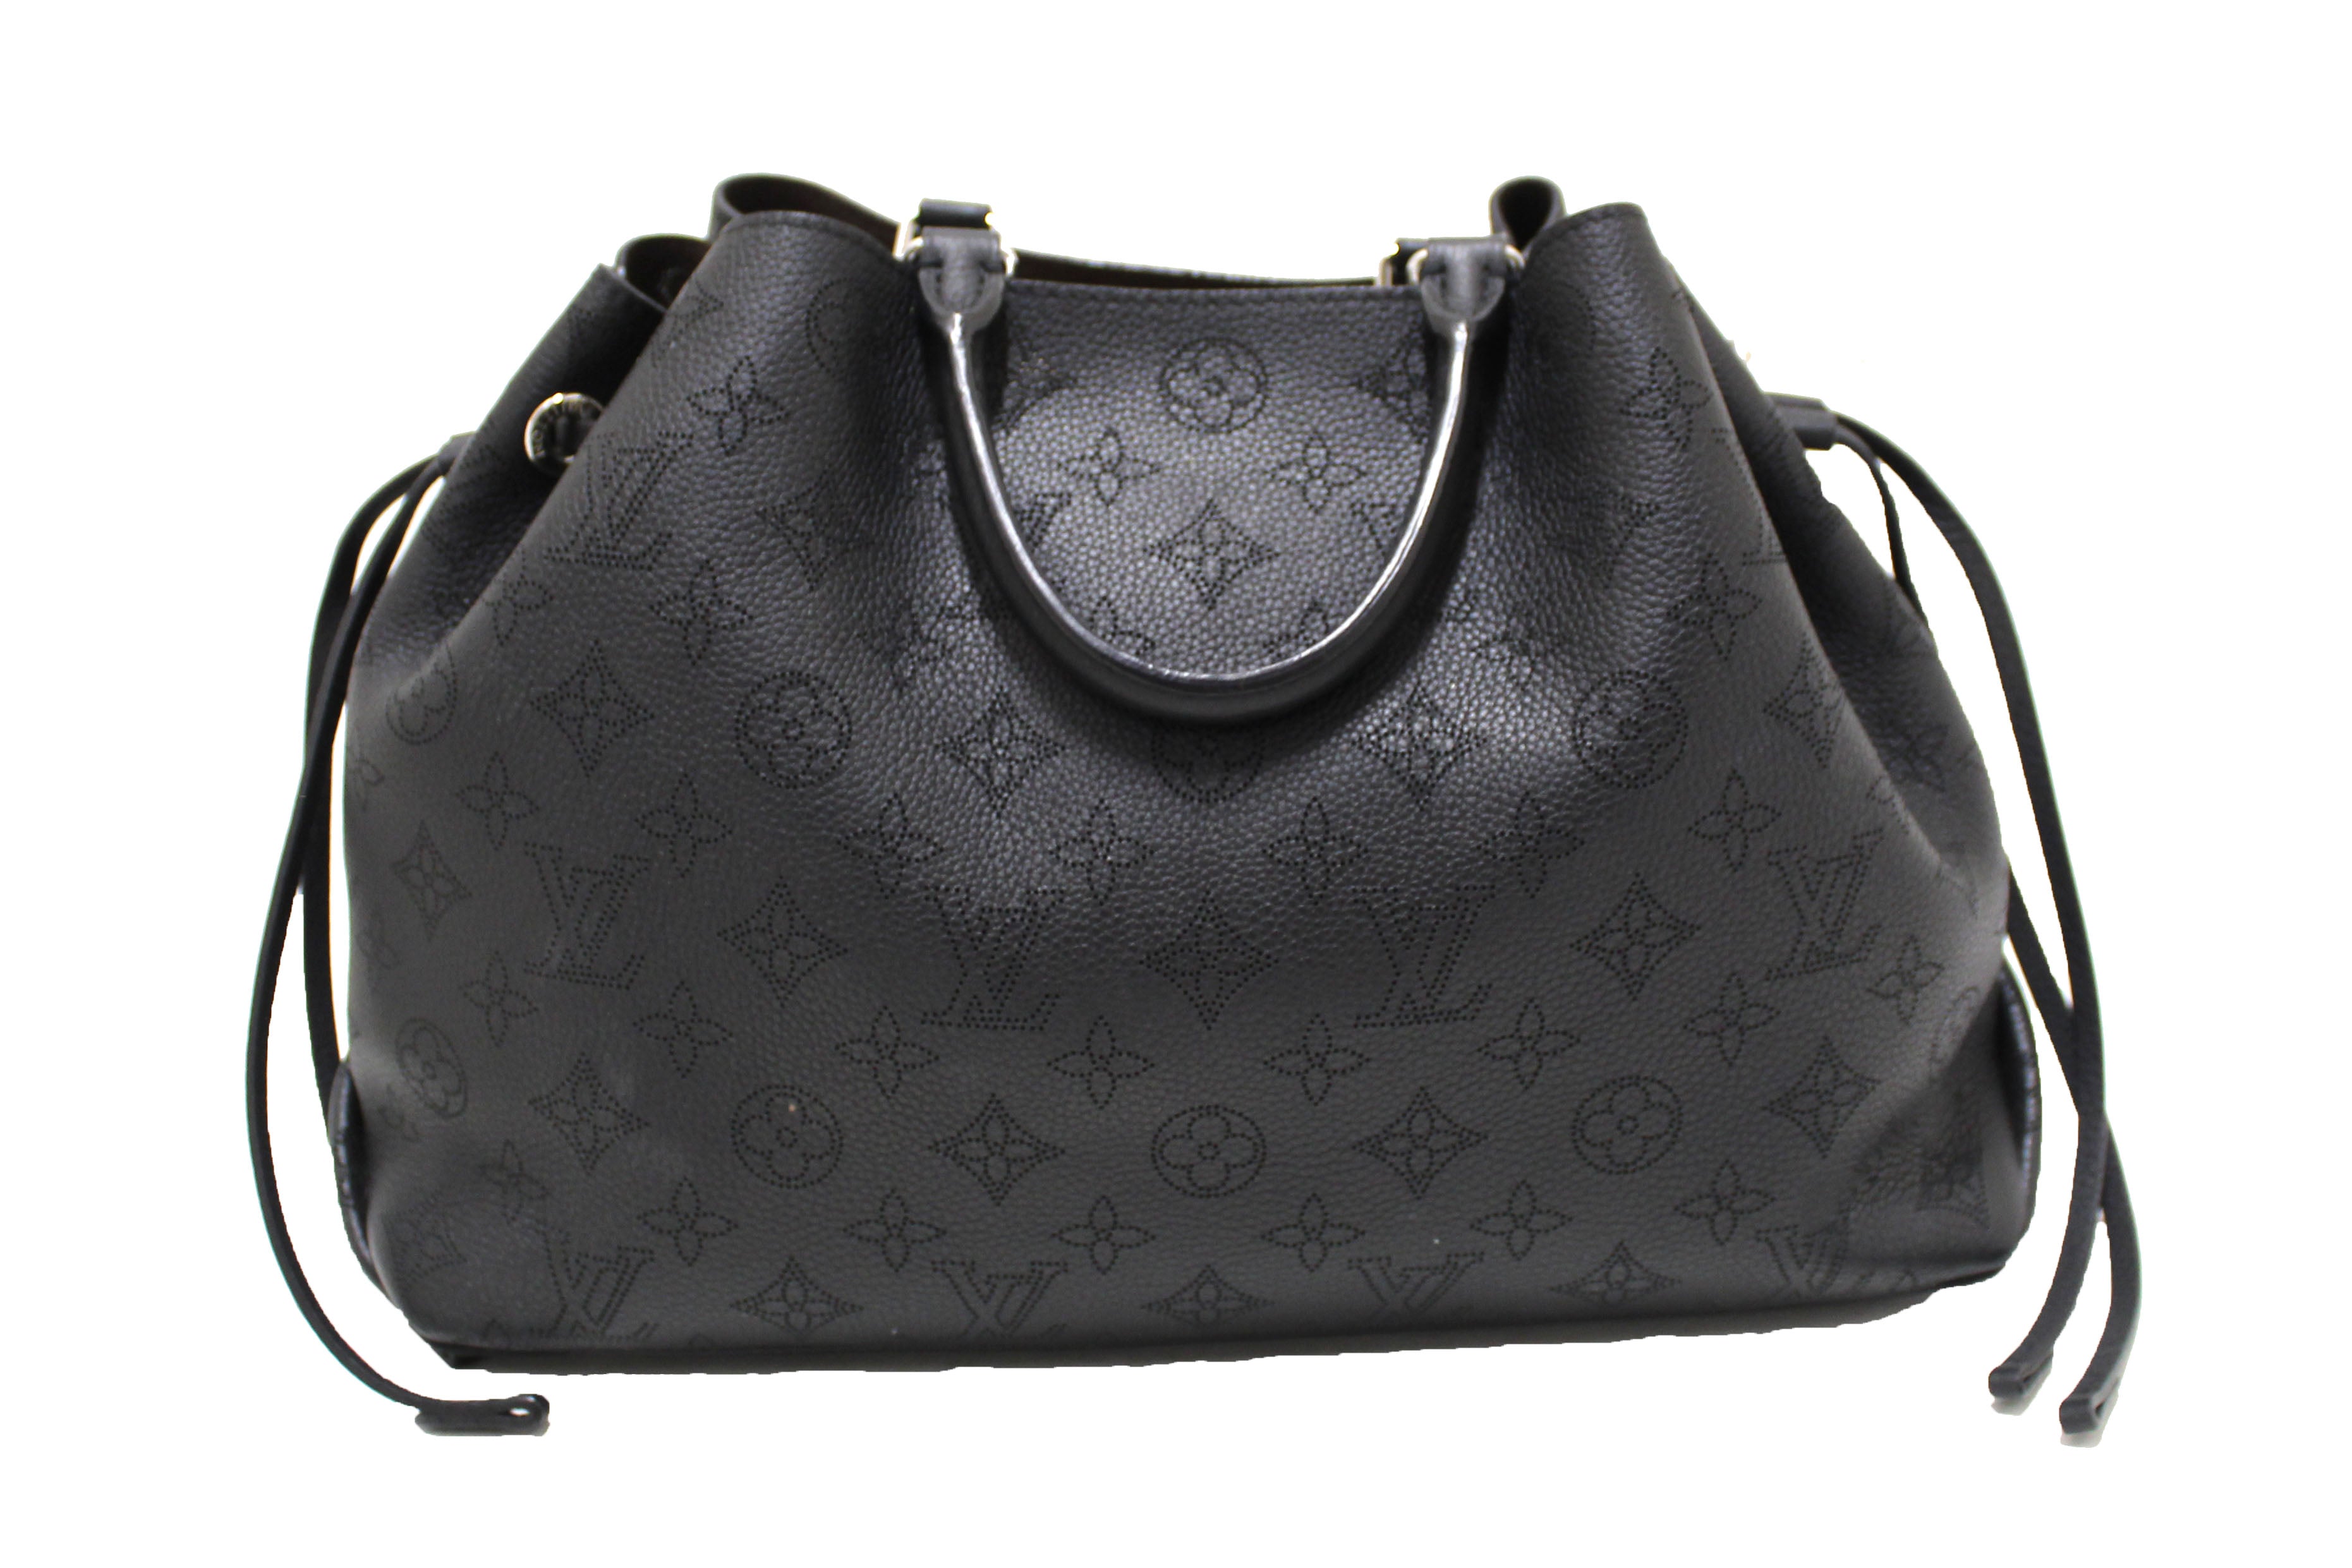 Authentic Louis Vuitton Black Mahina Perforated Calfskin Leather Bella Tote